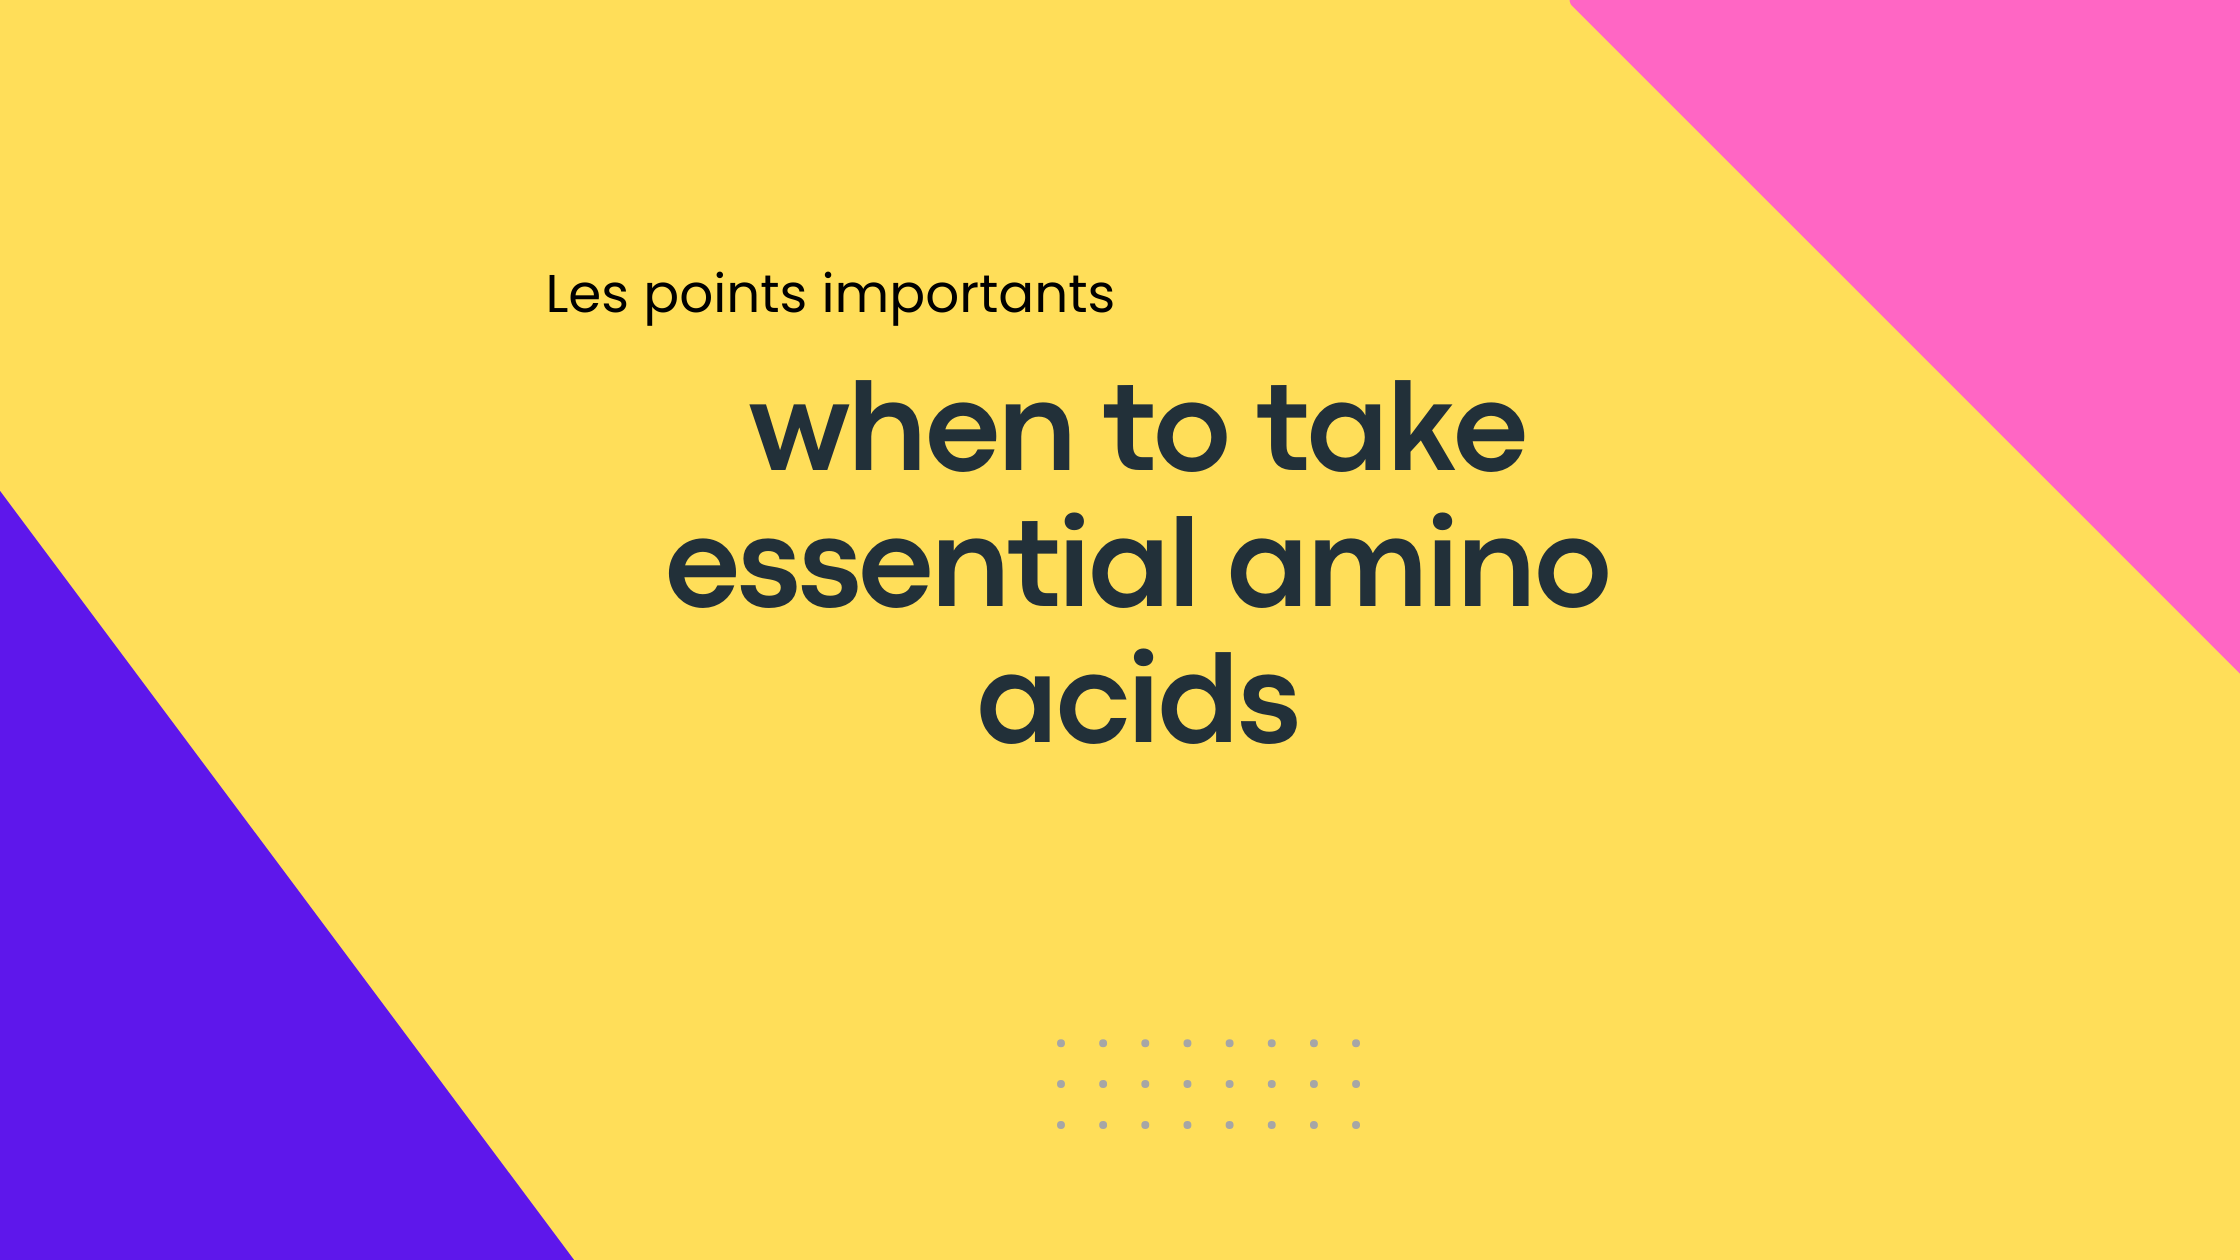 when to take essential amino acids | Les points importants